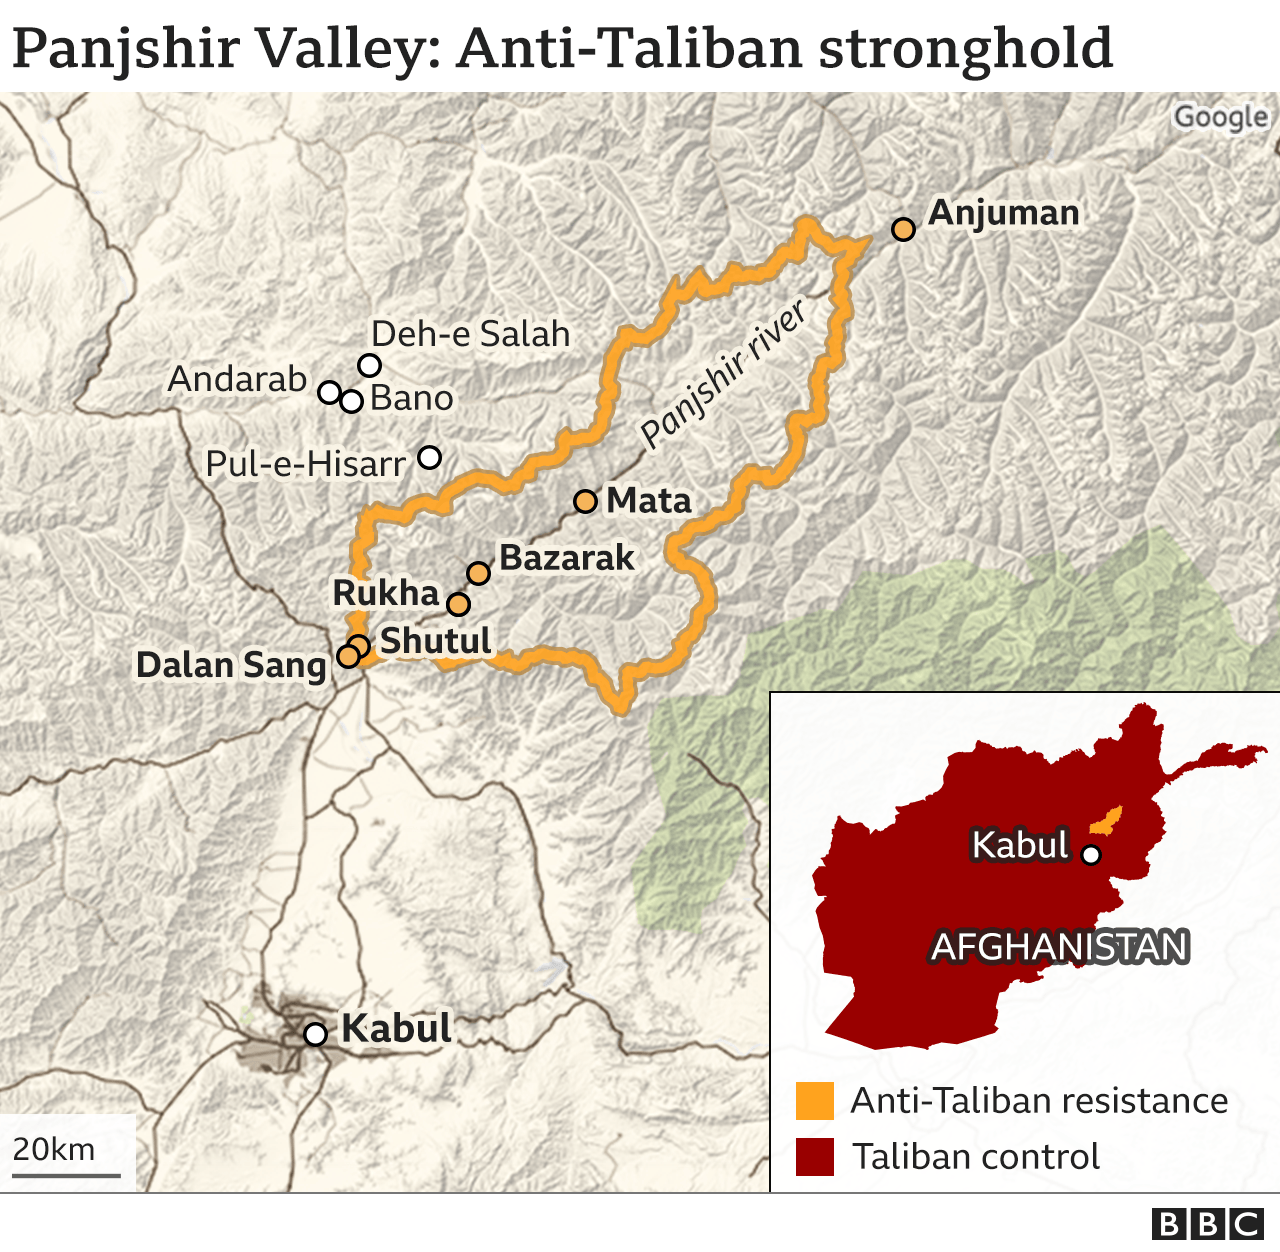 Panjshir - di valley wey dey try to hold off di Taliban